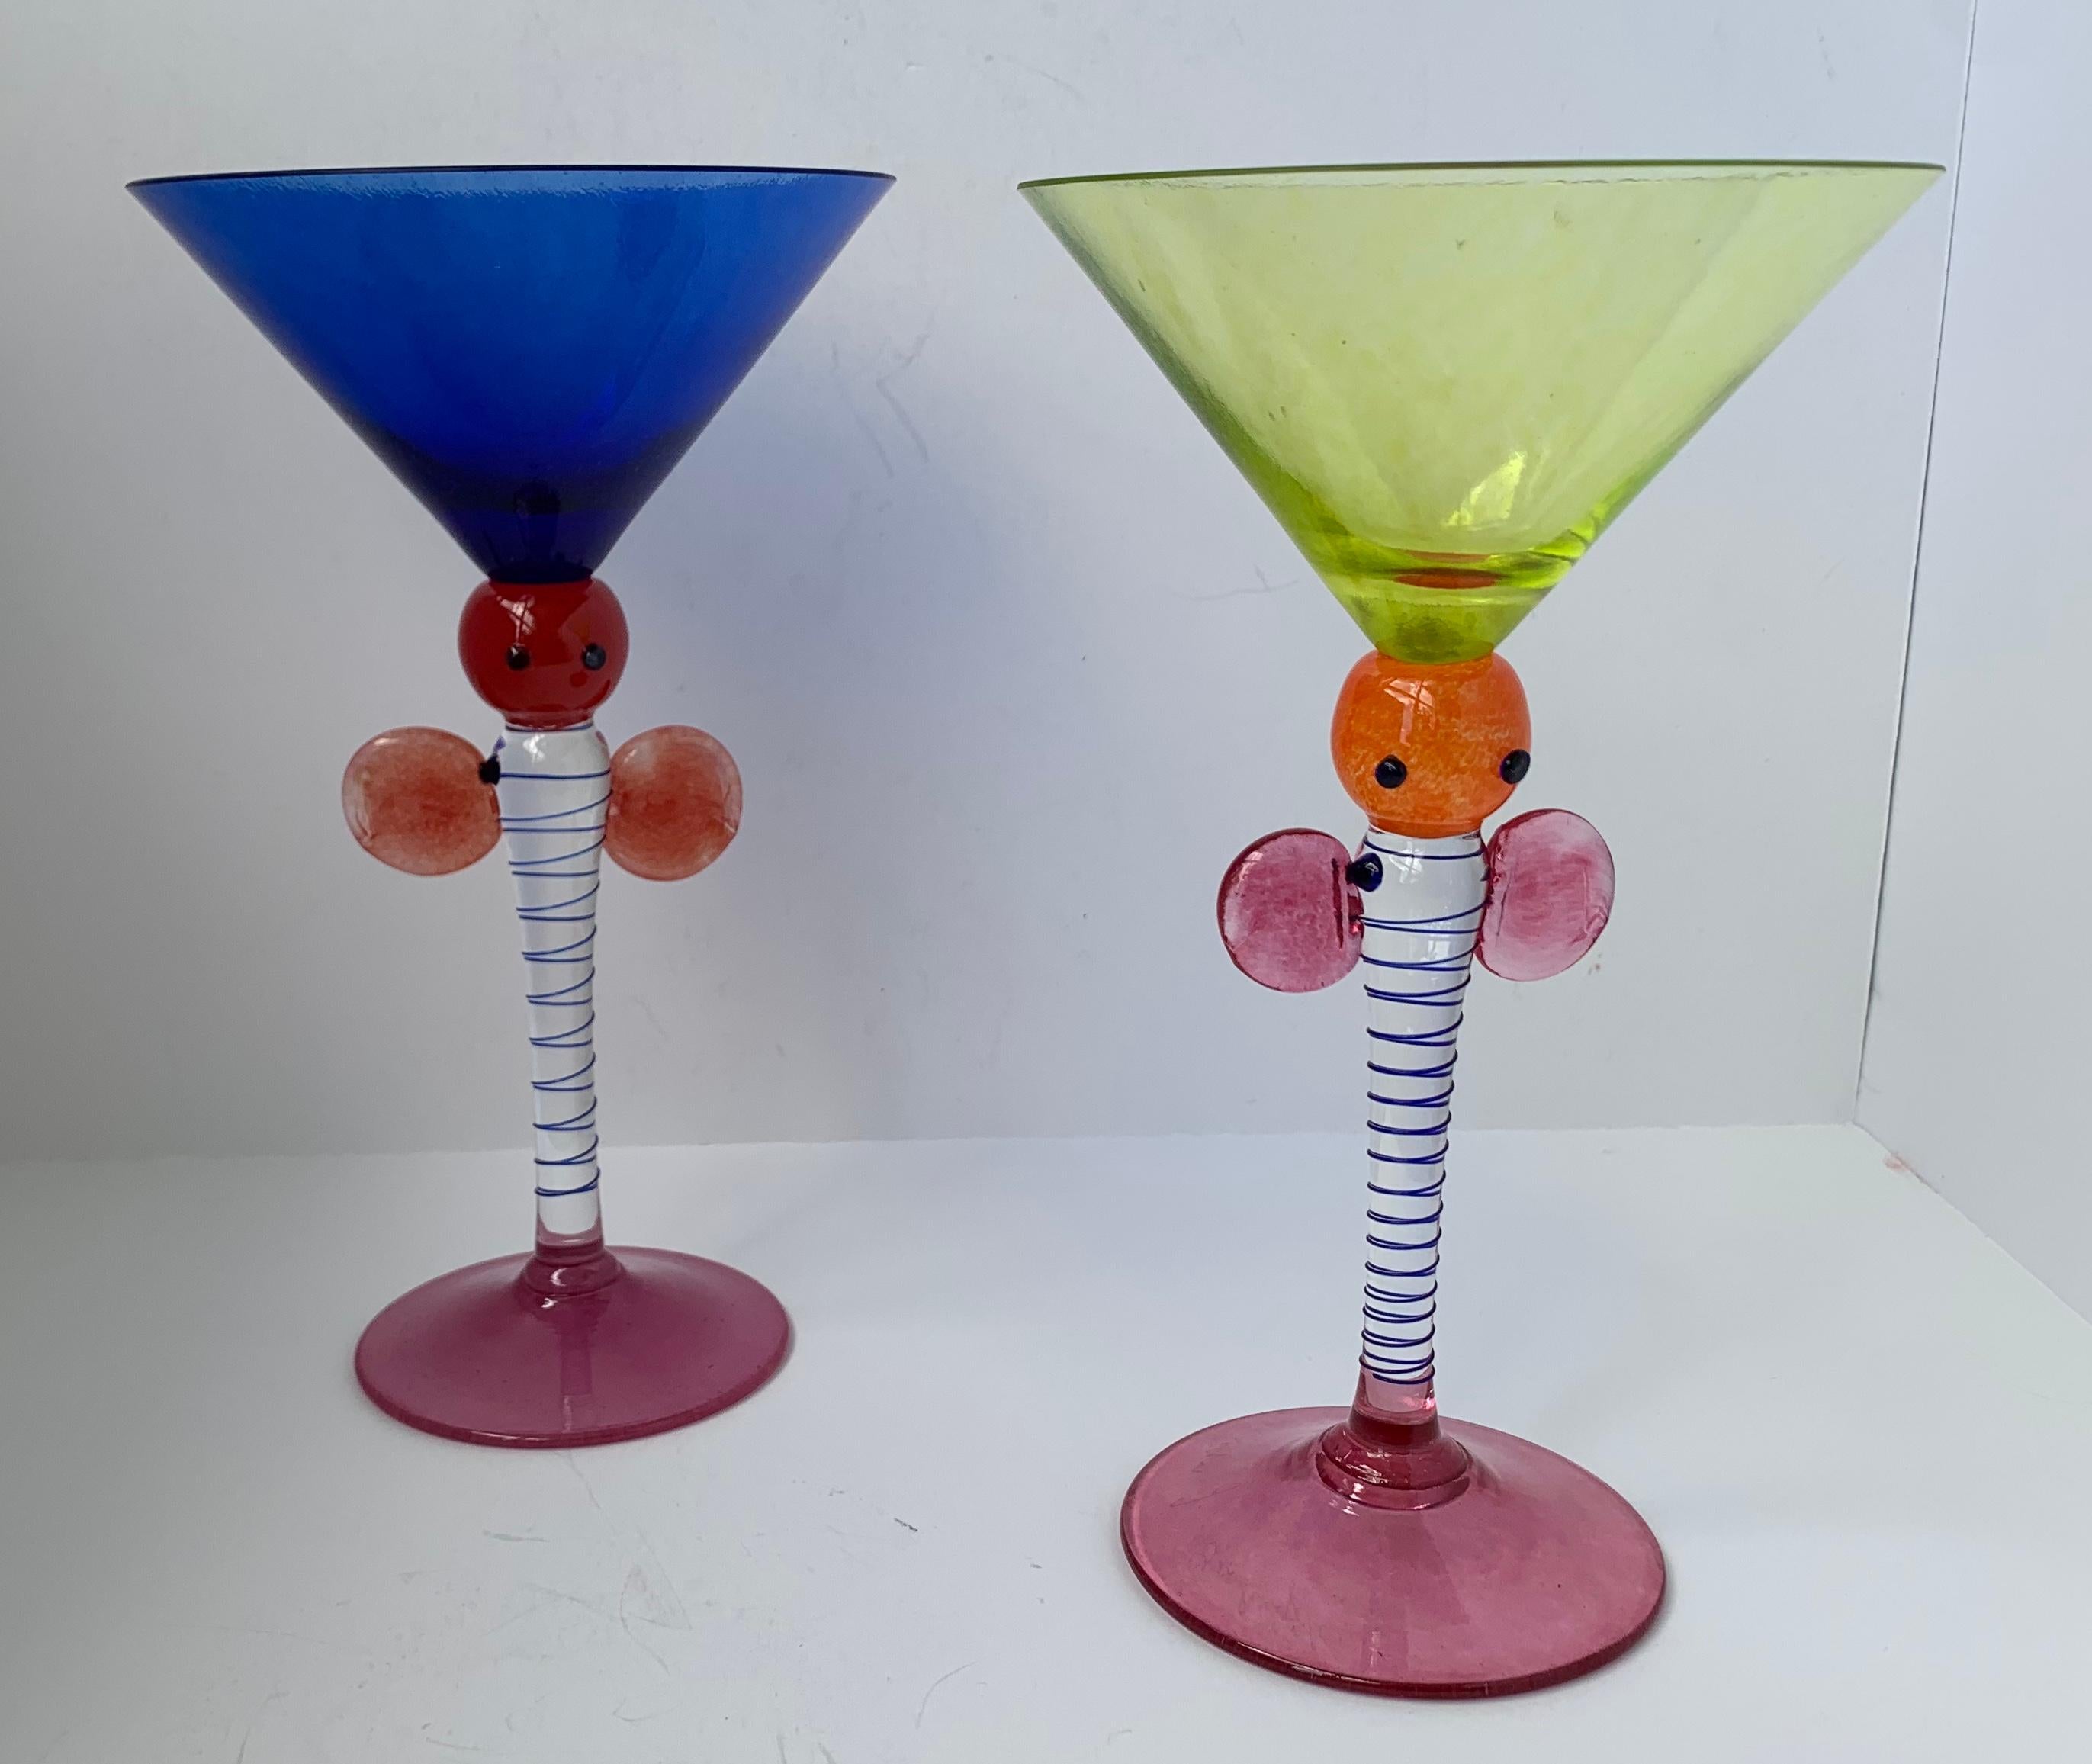 Pair of whimsical and very colorful cocktail glasses. They are mouth blown and have applied cobalt blue glass threading on the stems. The eyes and perhaps big ears add a touch of humor. Signed J. Guliajile.